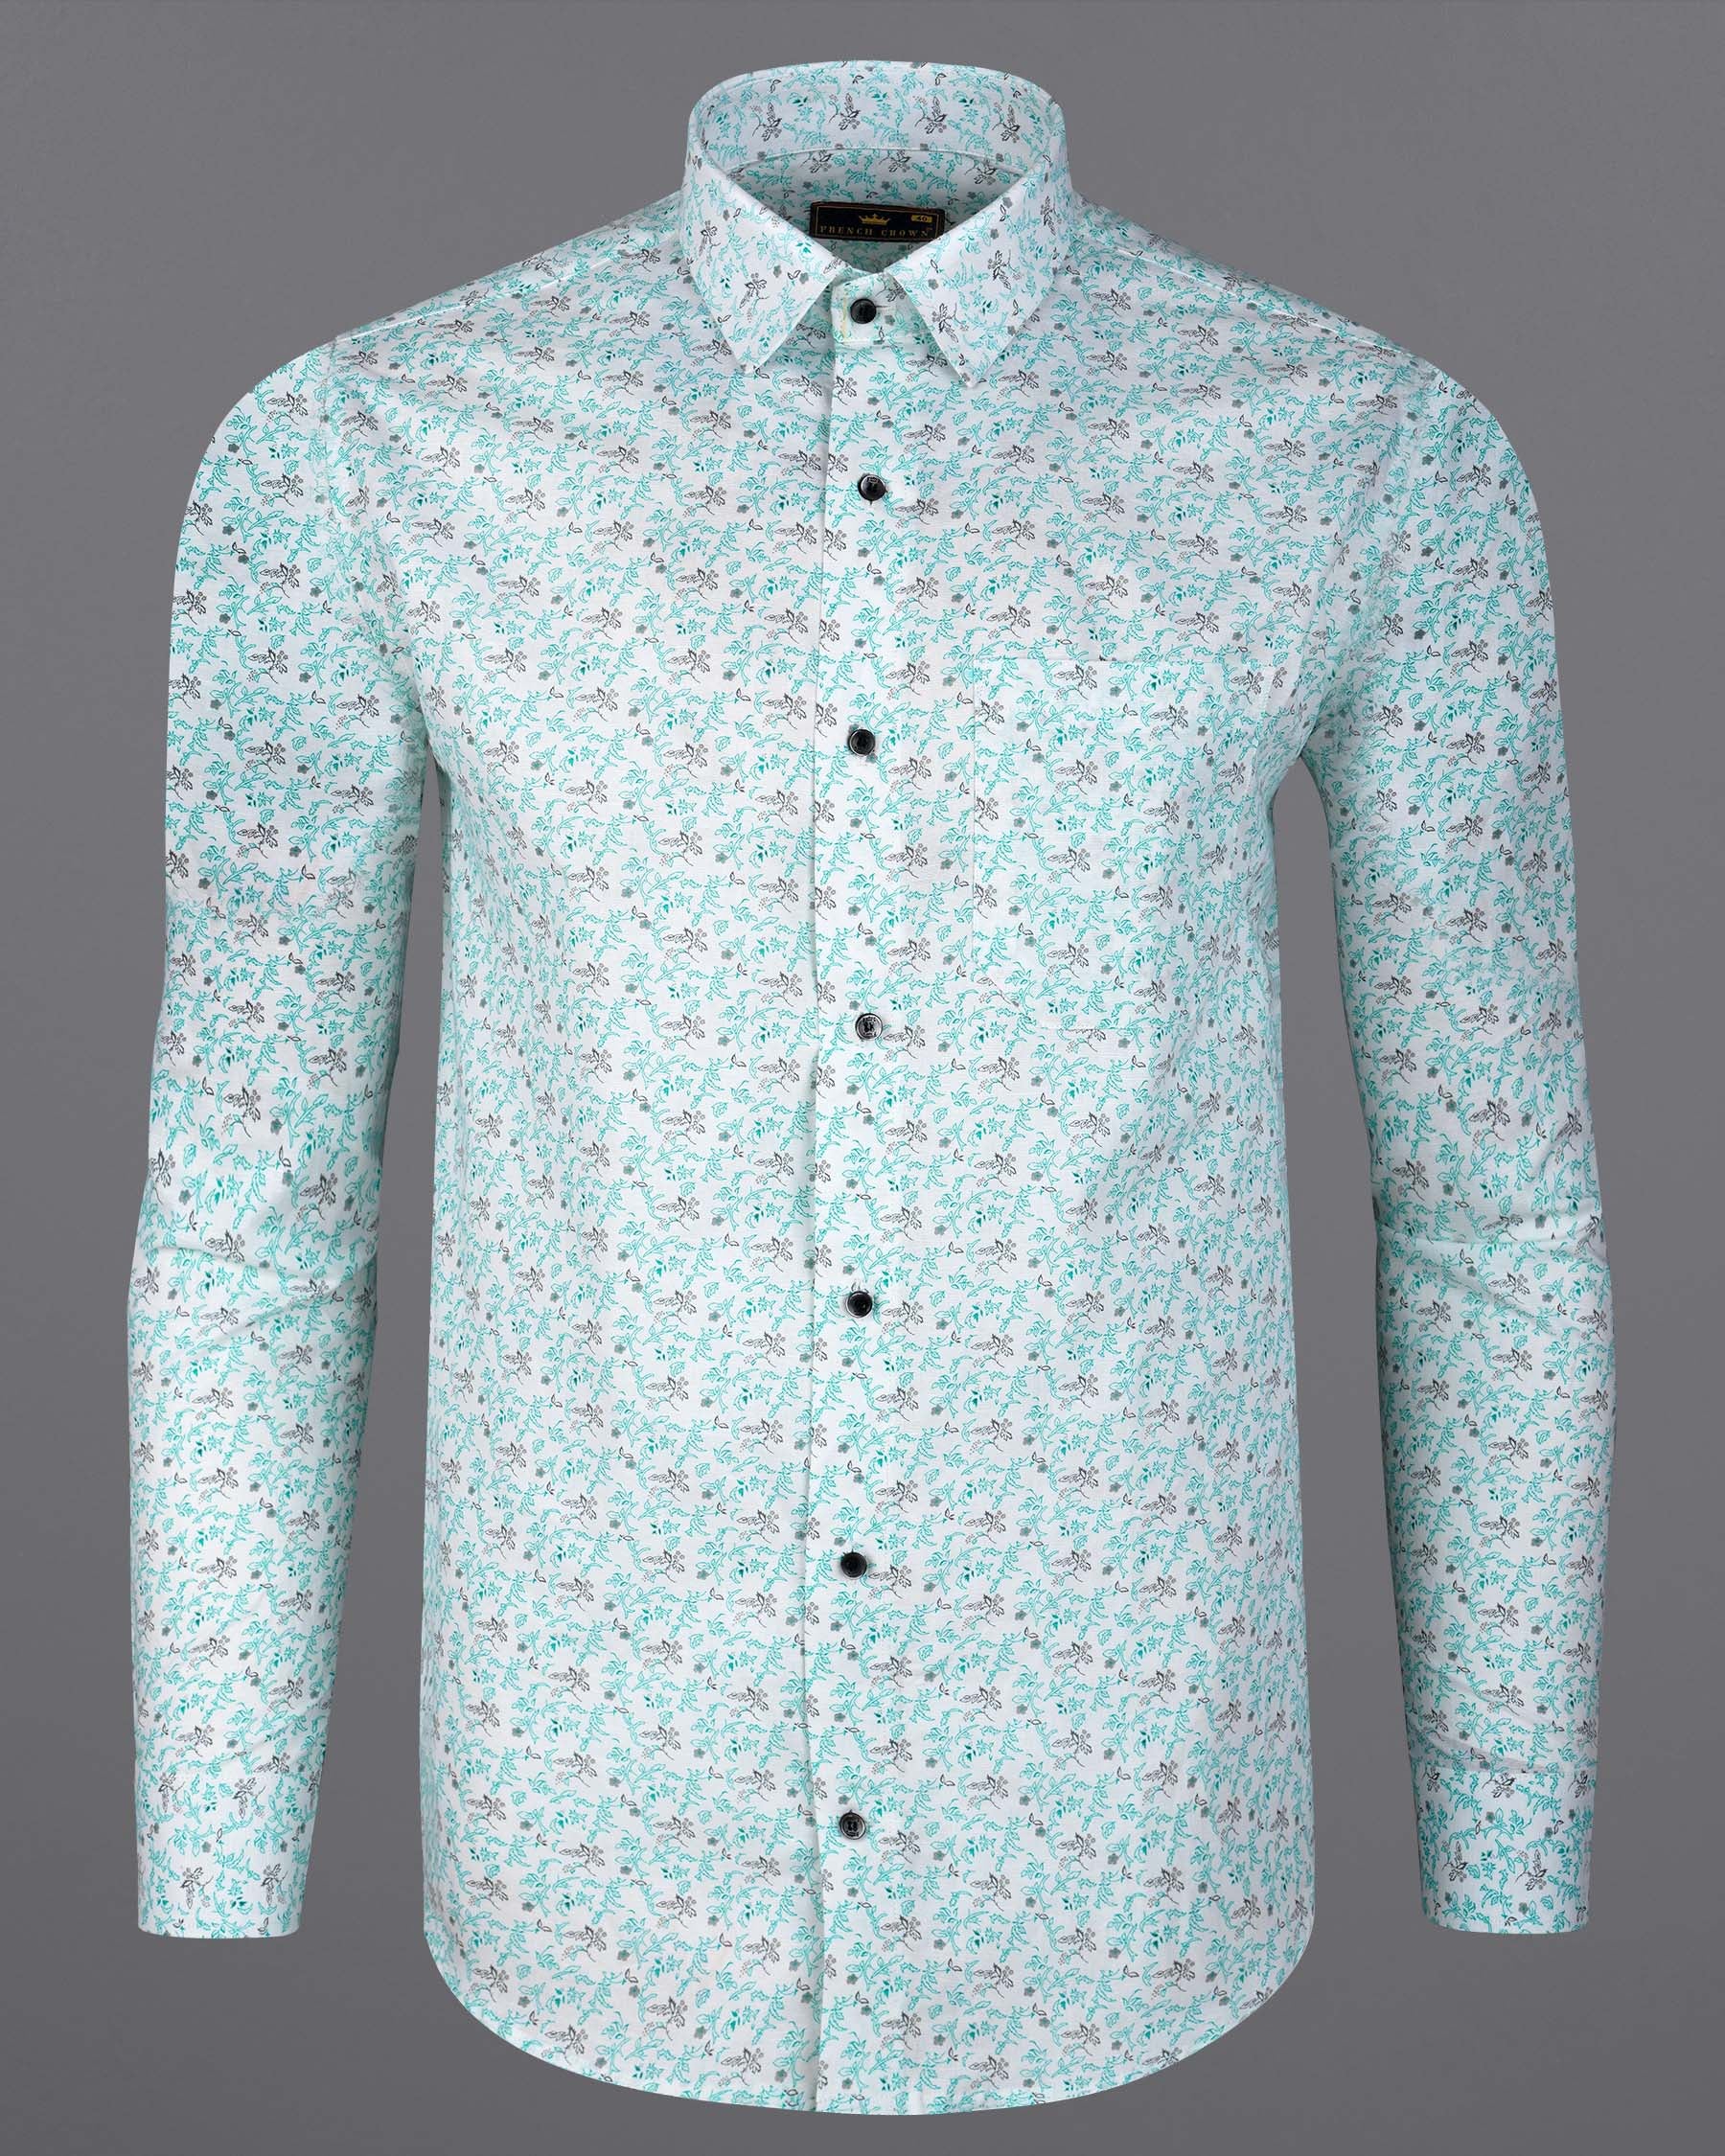 Bright White Leaves Printed Luxurious Linen Shirt 7874-BLK-38, 7874-BLK-H-38, 7874-BLK-39, 7874-BLK-H-39, 7874-BLK-40, 7874-BLK-H-40, 7874-BLK-42, 7874-BLK-H-42, 7874-BLK-44, 7874-BLK-H-44, 7874-BLK-46, 7874-BLK-H-46, 7874-BLK-48, 7874-BLK-H-48, 7874-BLK-50, 7874-BLK-H-50, 7874-BLK-52, 7874-BLK-H-52